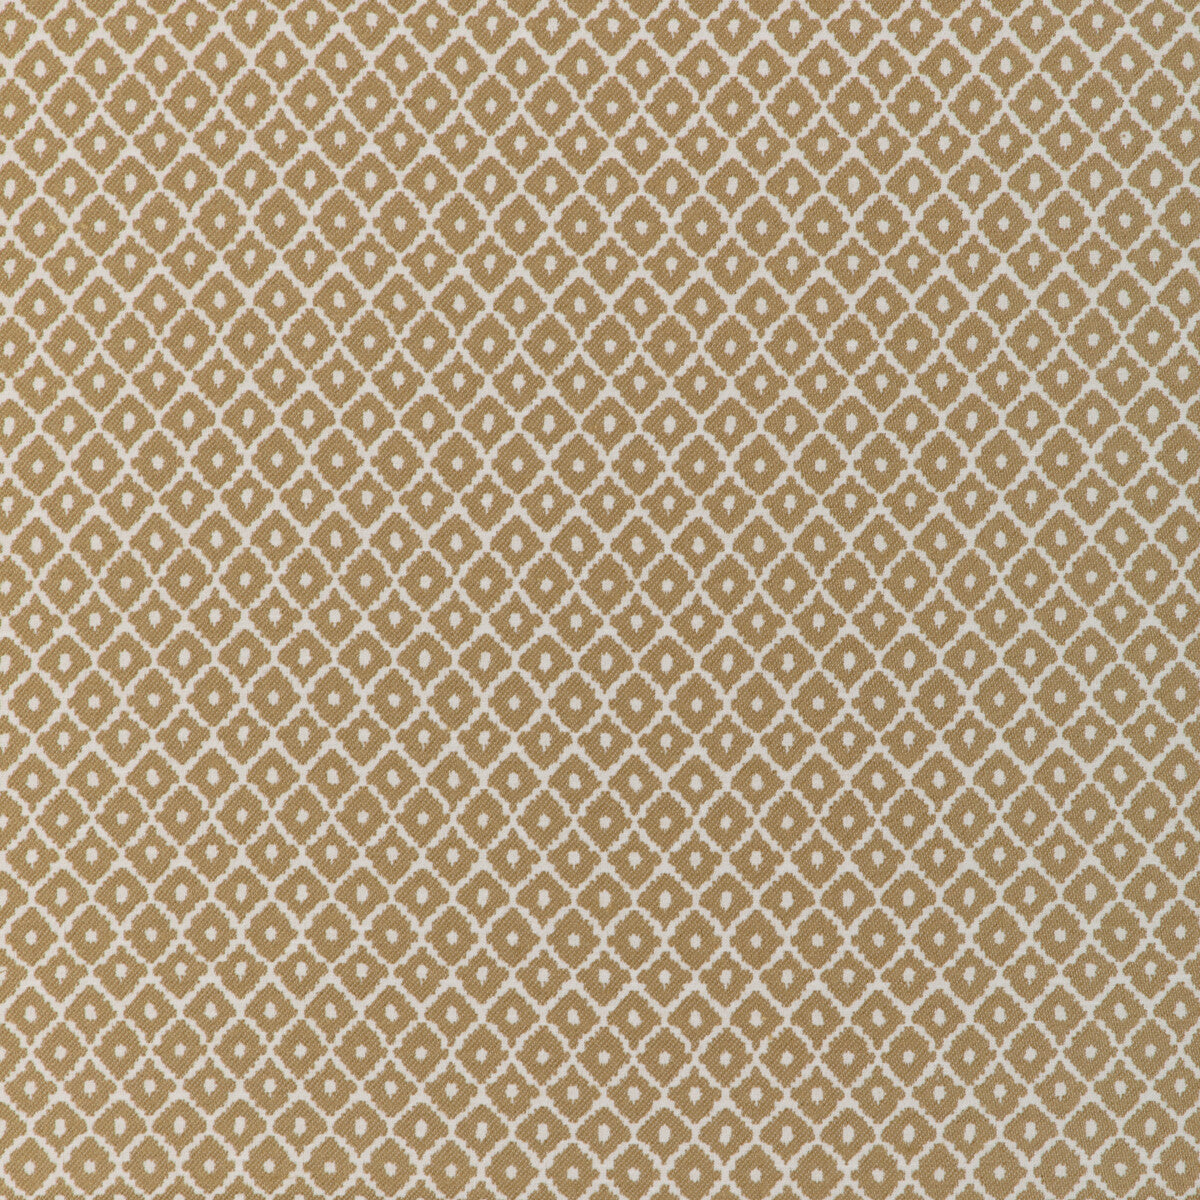 Kravet Design fabric in 37243-16 color - pattern 37243.16.0 - by Kravet Design in the Woven Colors collection